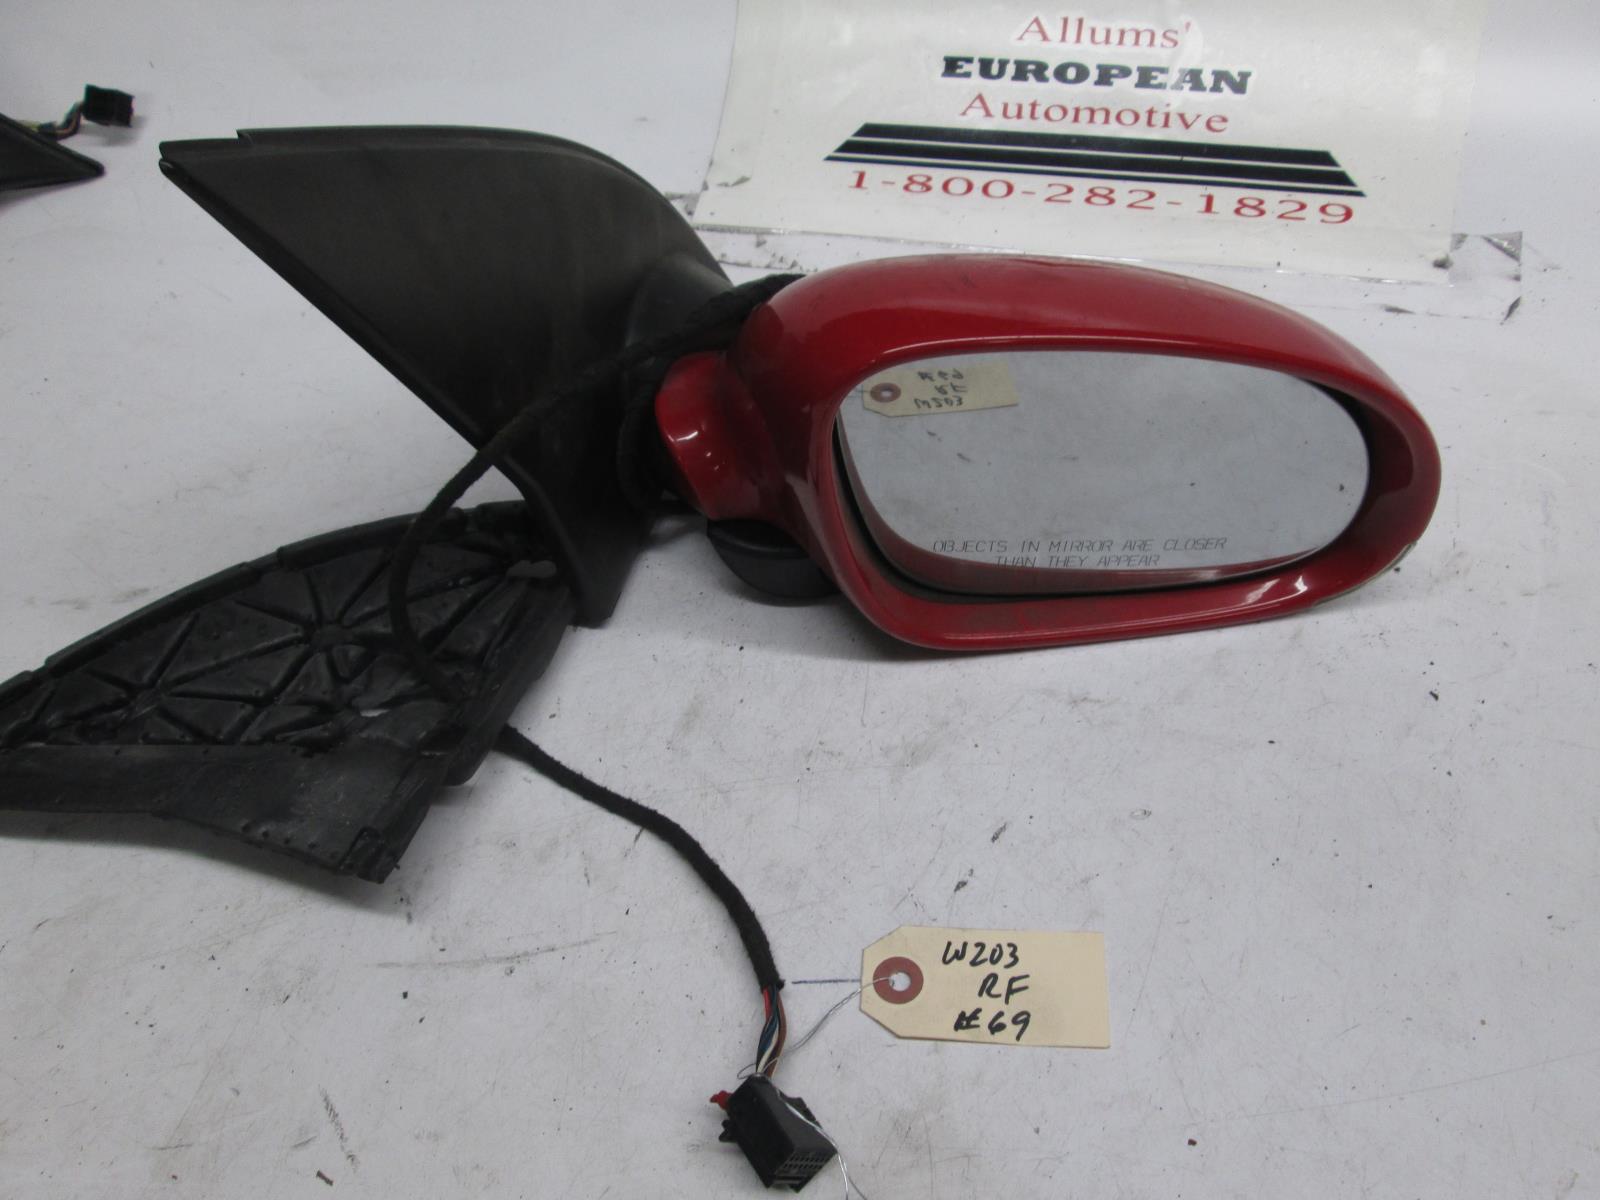 Passenger Side Mirror For Rabbit 06-09 Paint to Match